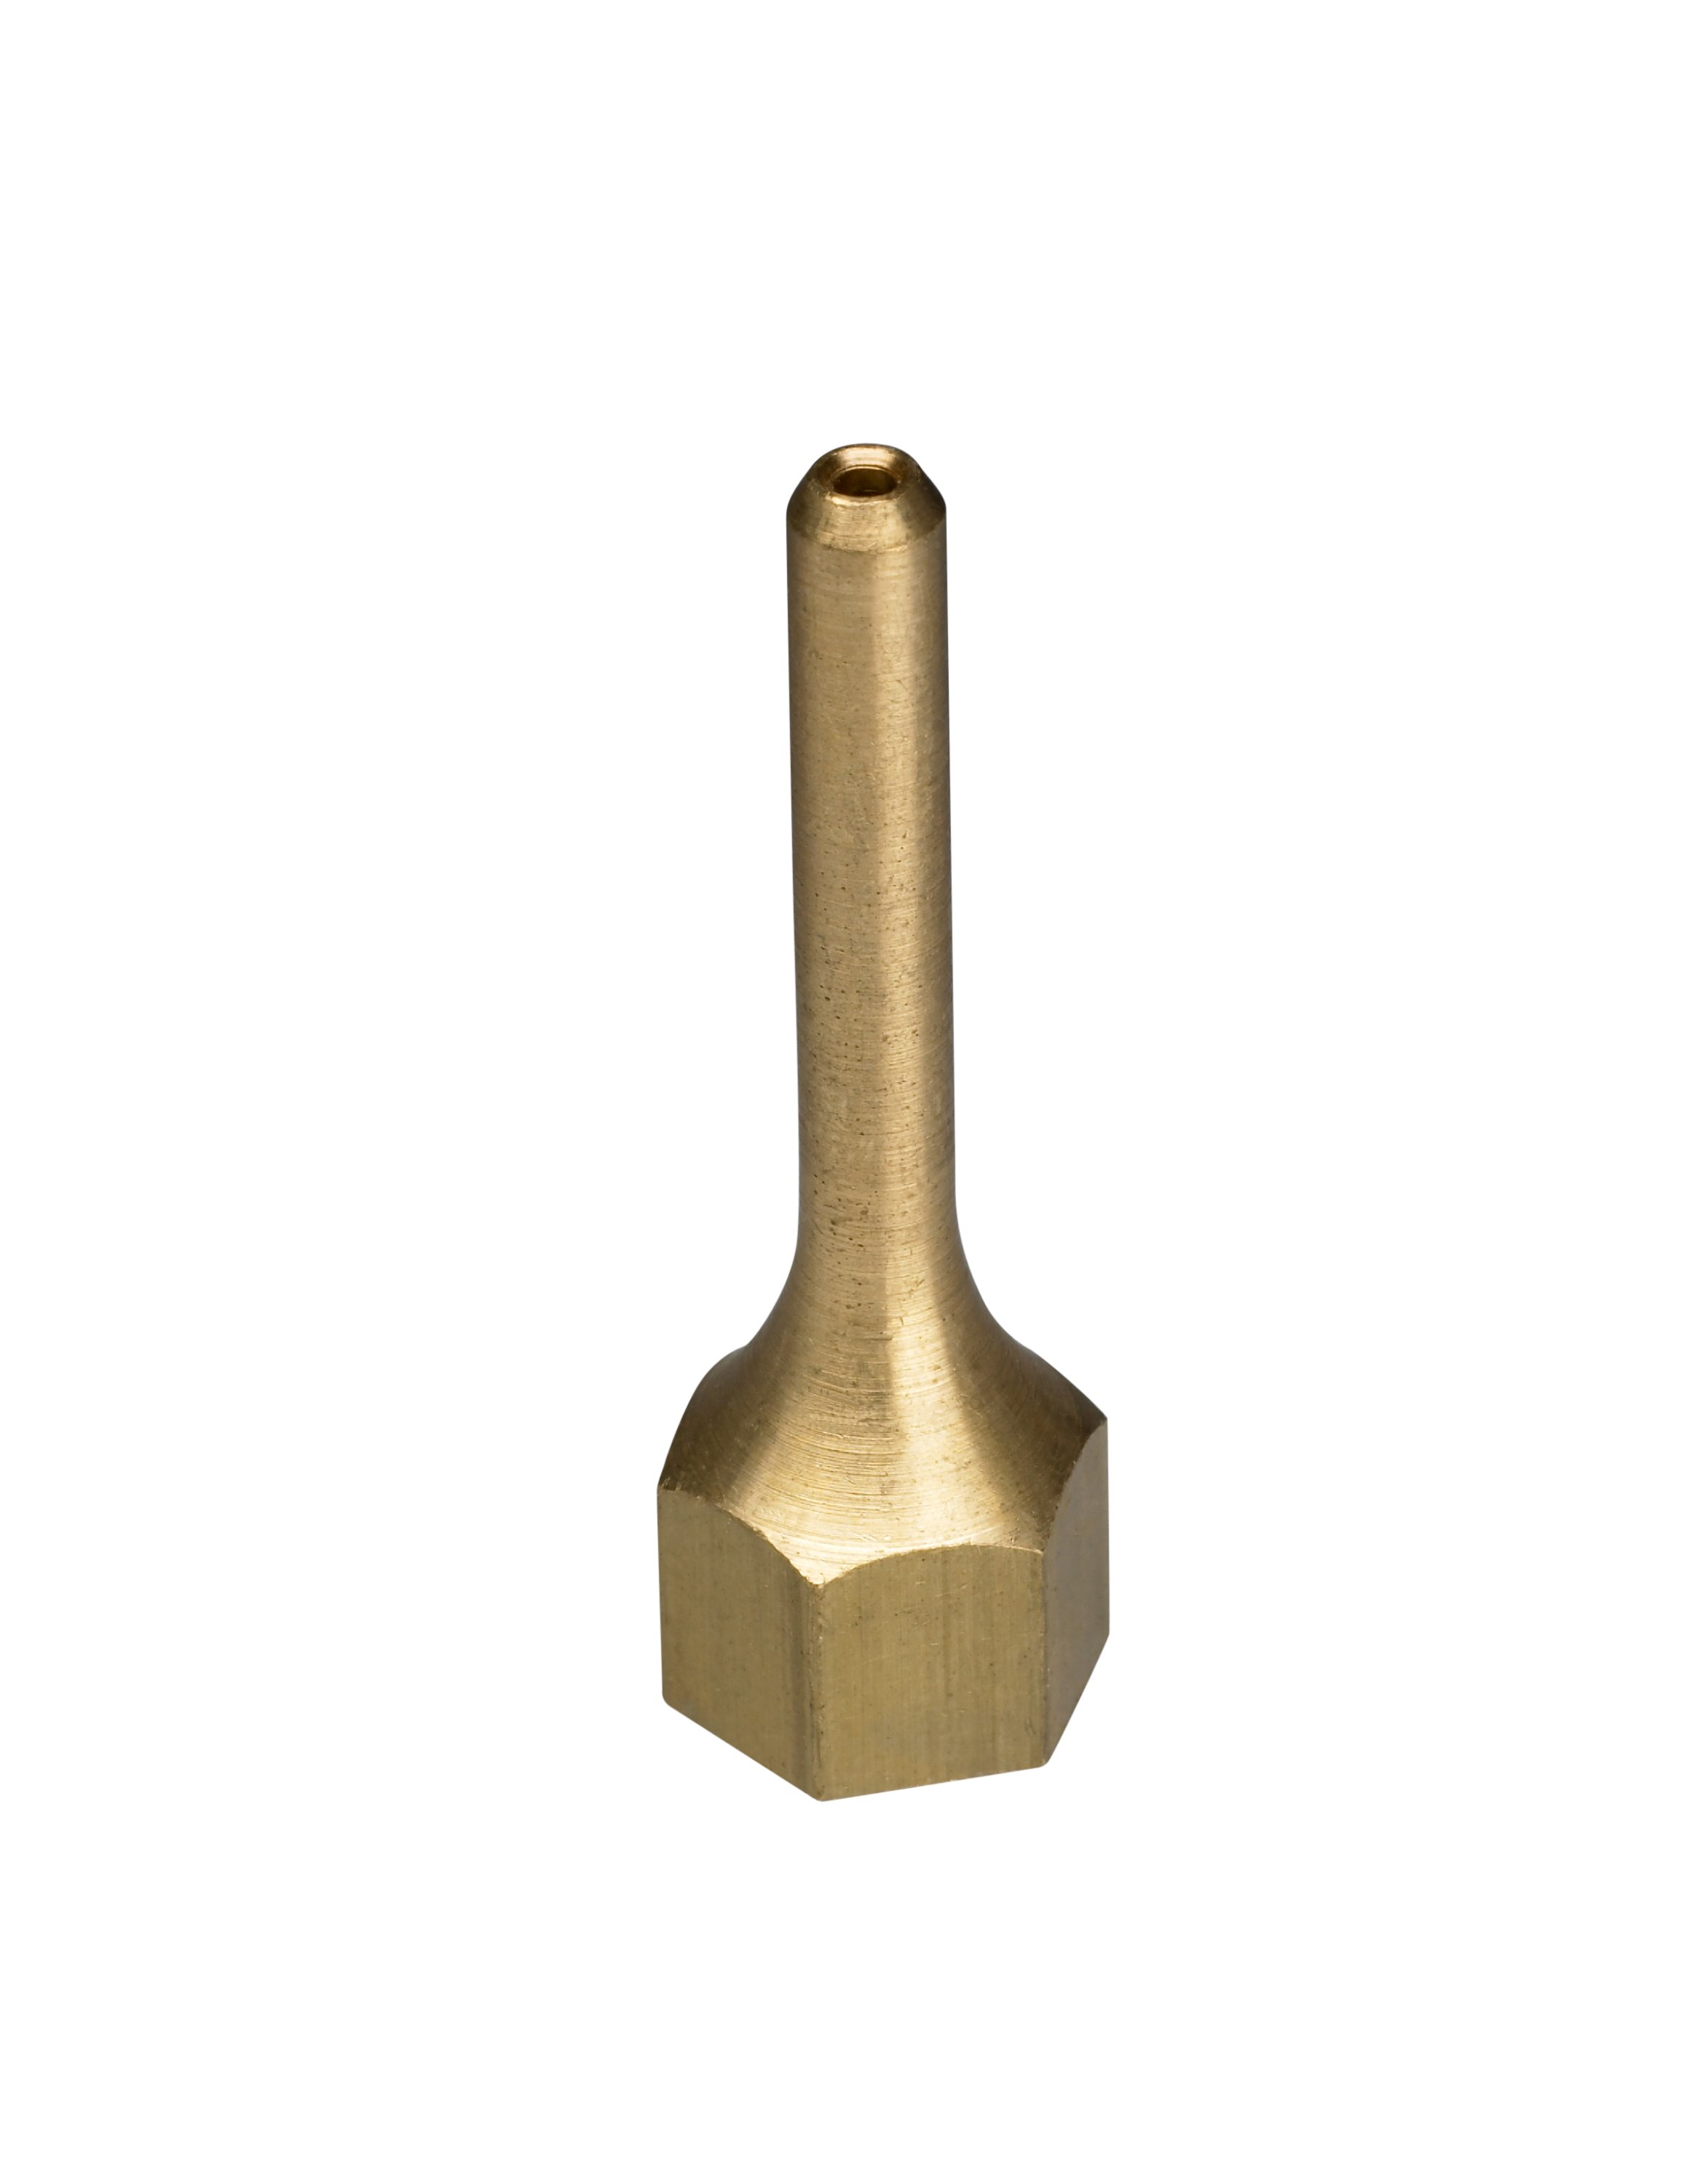 A (0.072") brass tip that offers a better sight line and maximum control during application, and helps reduce initial surge.